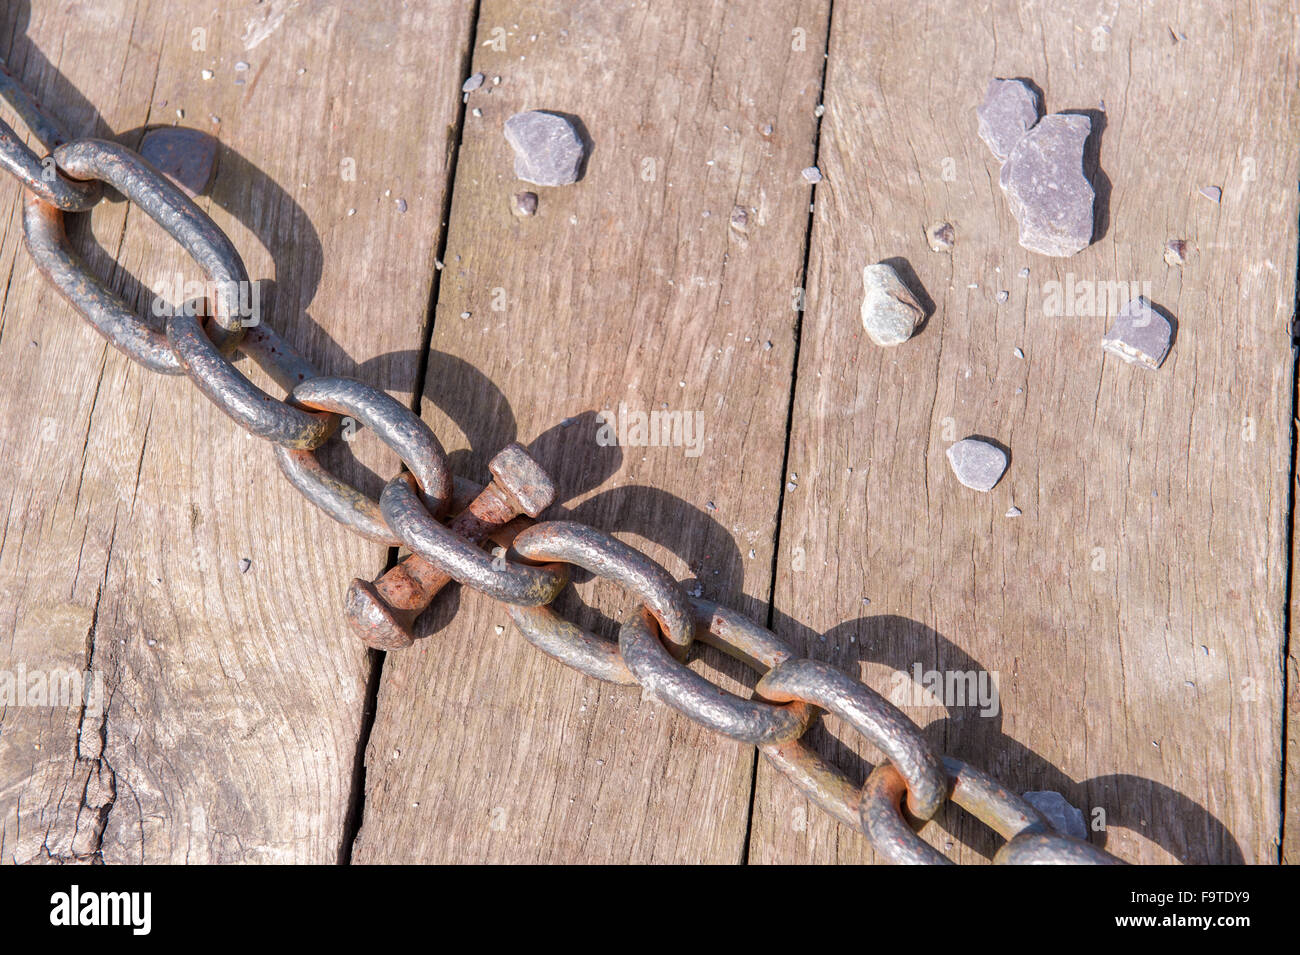 Metal linked chain on wooden surface and bolt Stock Photo